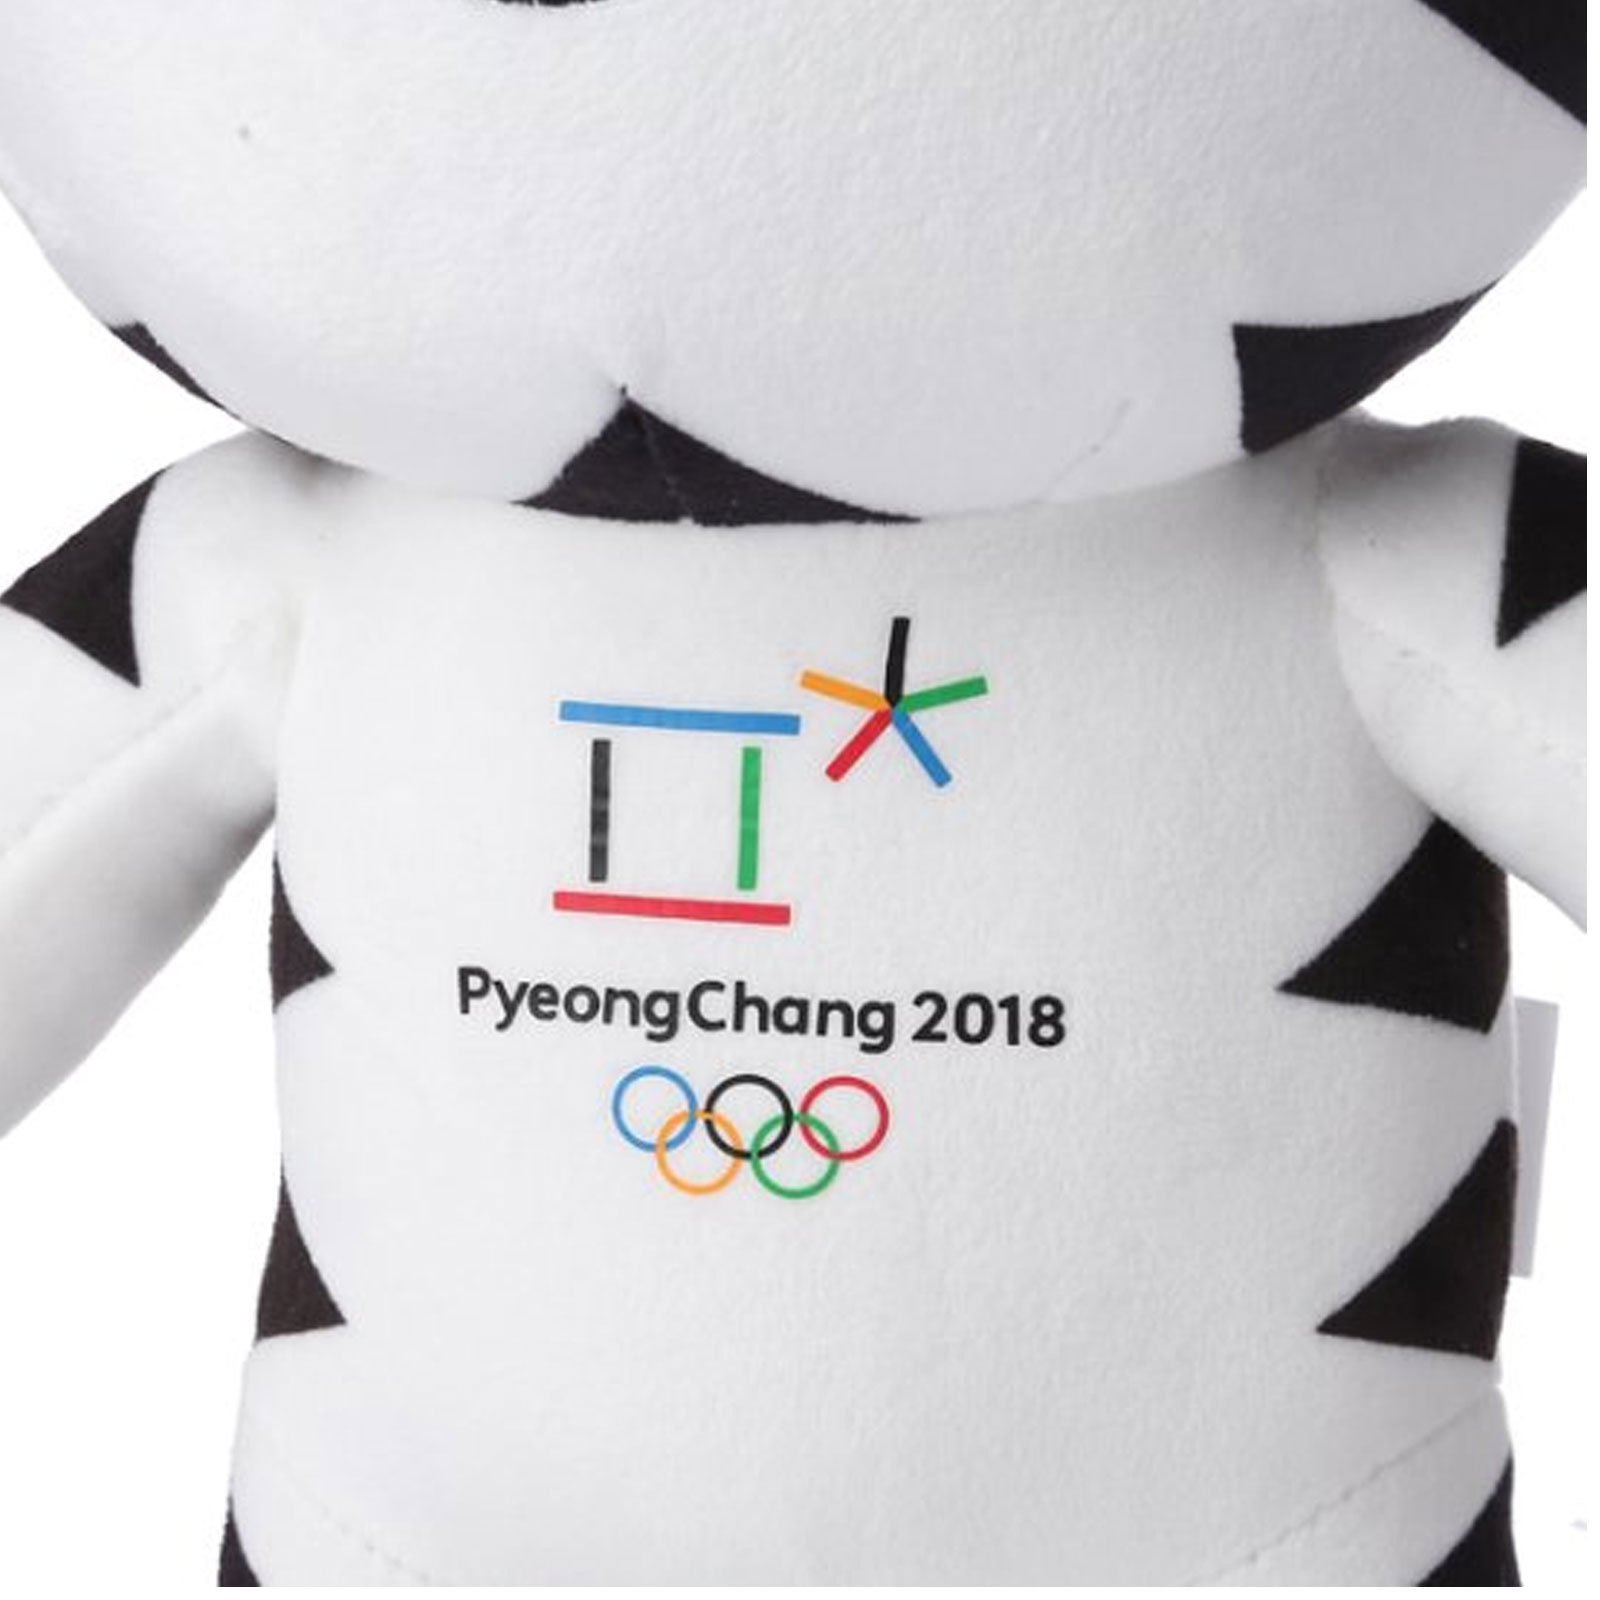 2023 Pyeongchang United States Olympic Luge Team to Accept Bitcoin Donations